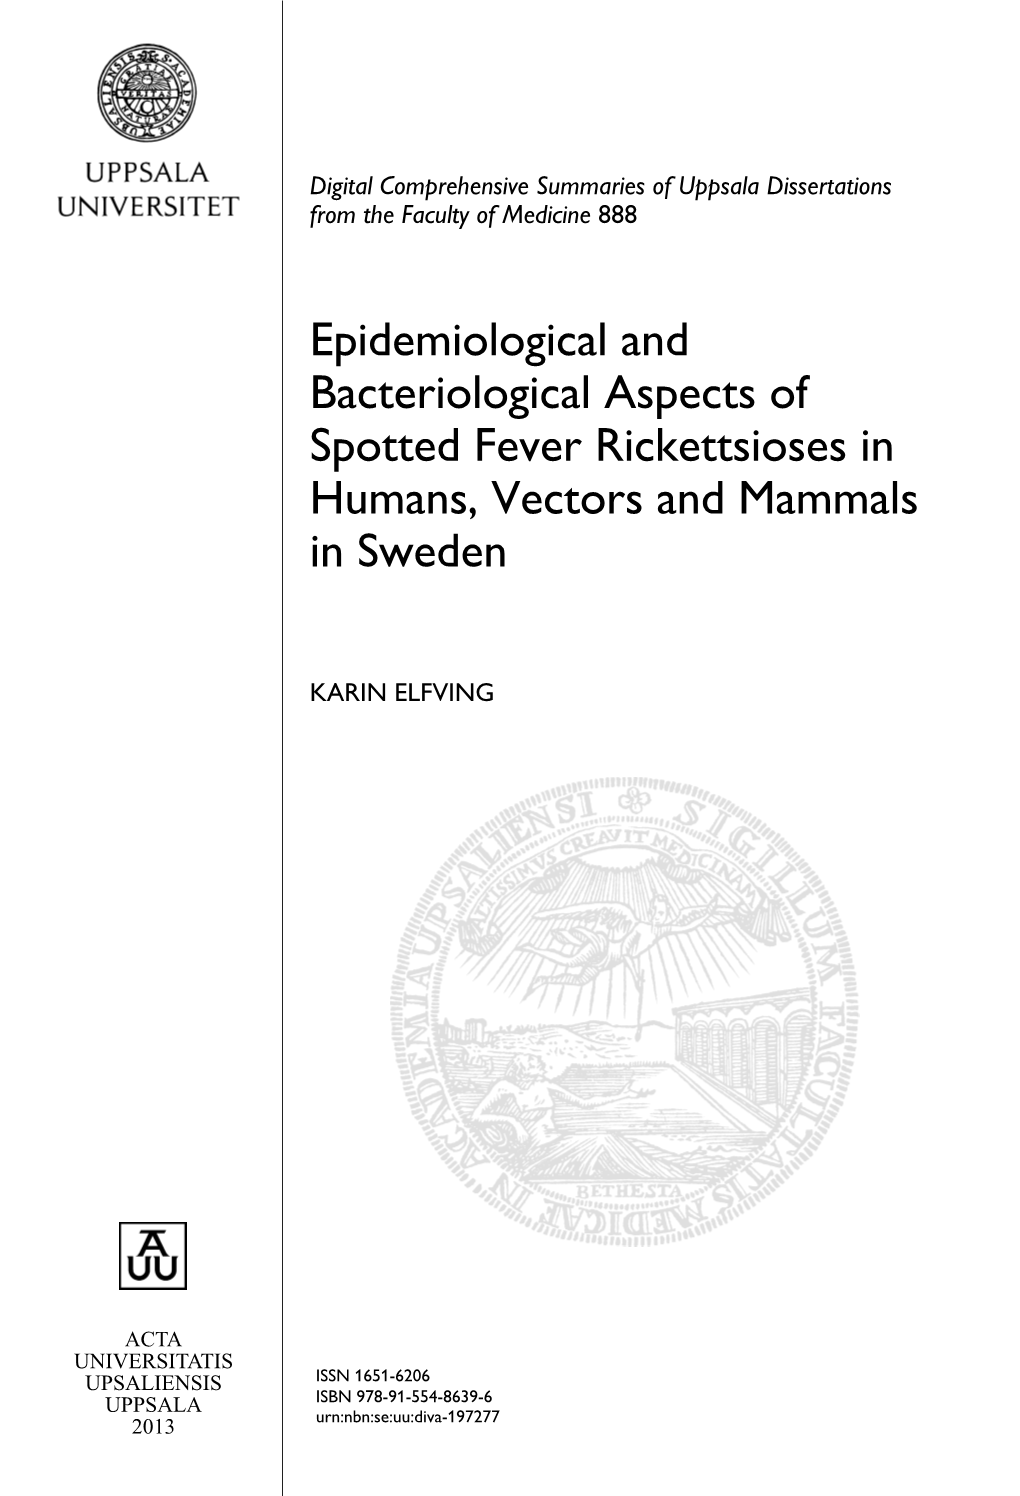 Epidemiological and Bacteriological Aspects of Spotted Fever Rickettsioses in Humans, Vectors and Mammals in Sweden